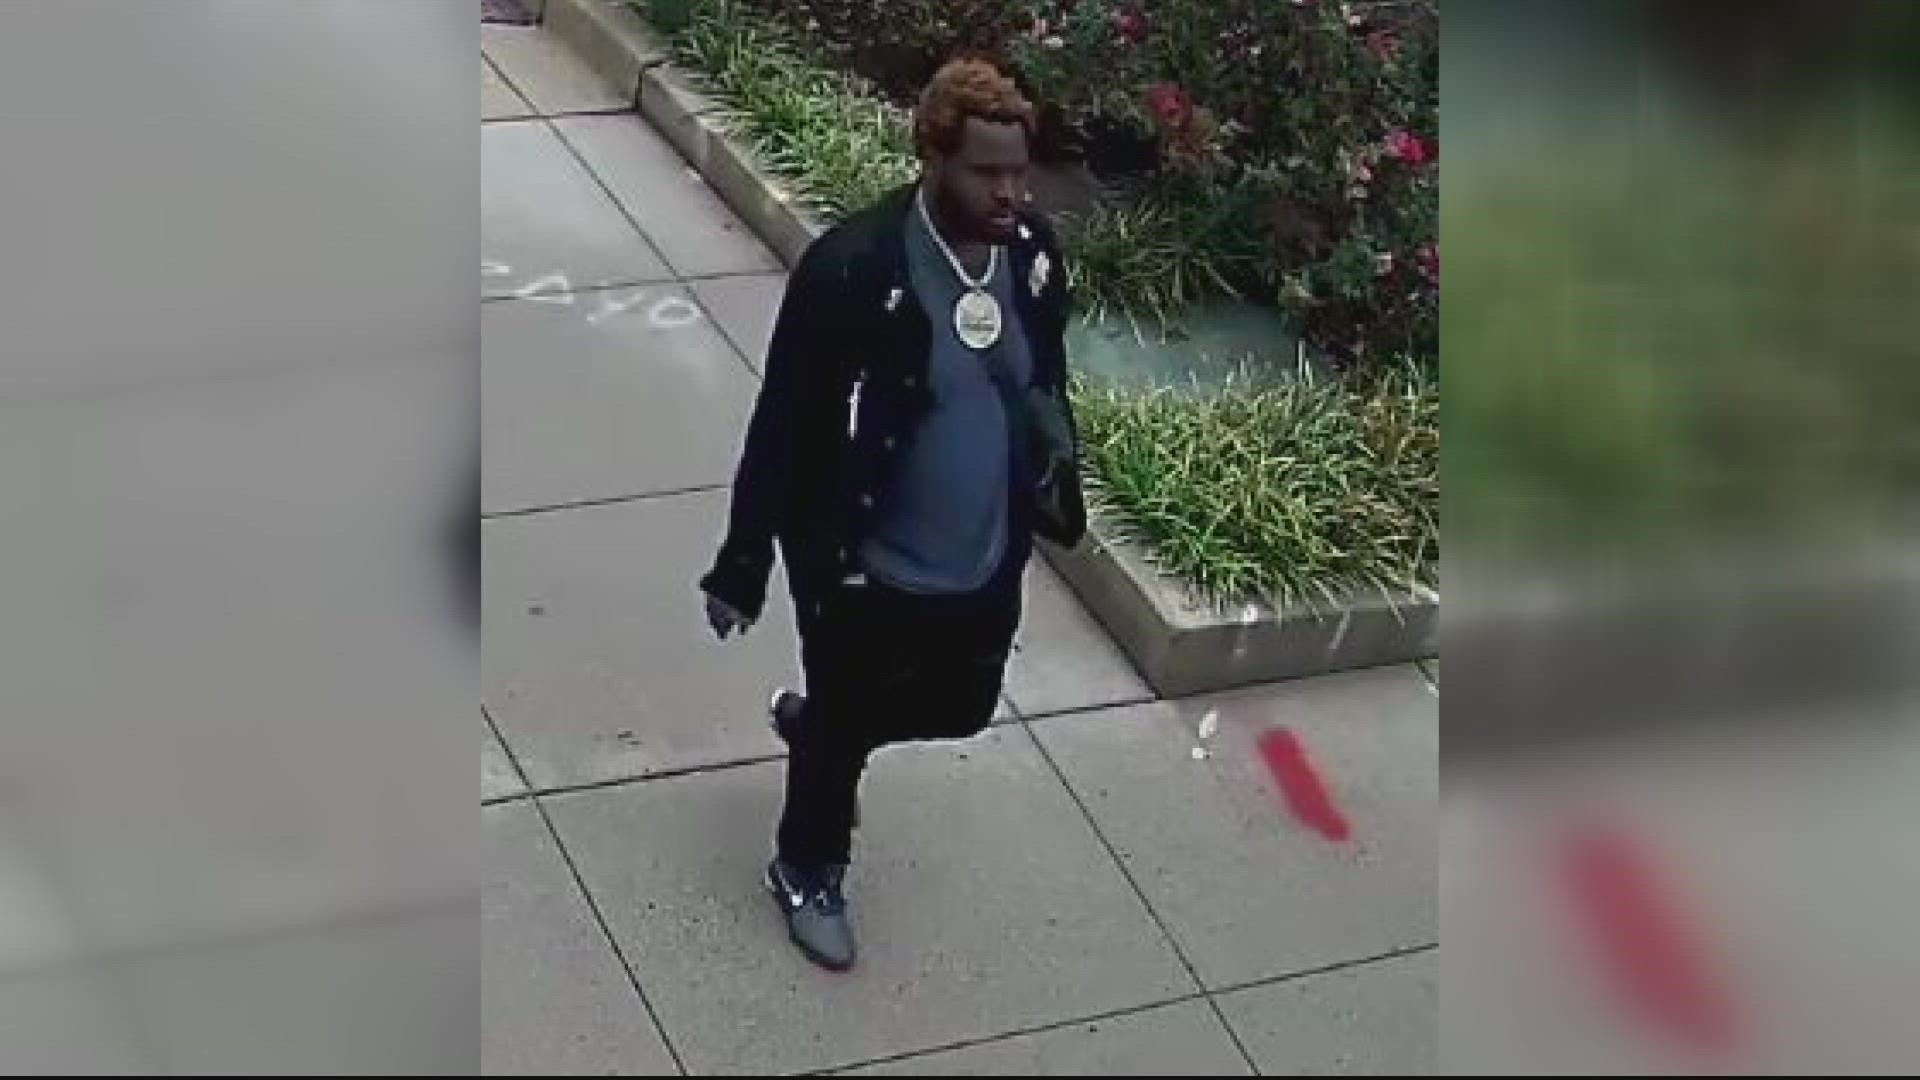 Police have released photos of a man they believe got out a gun and assaulted a woman at a Vienna hotel after he entered her unlocked room.